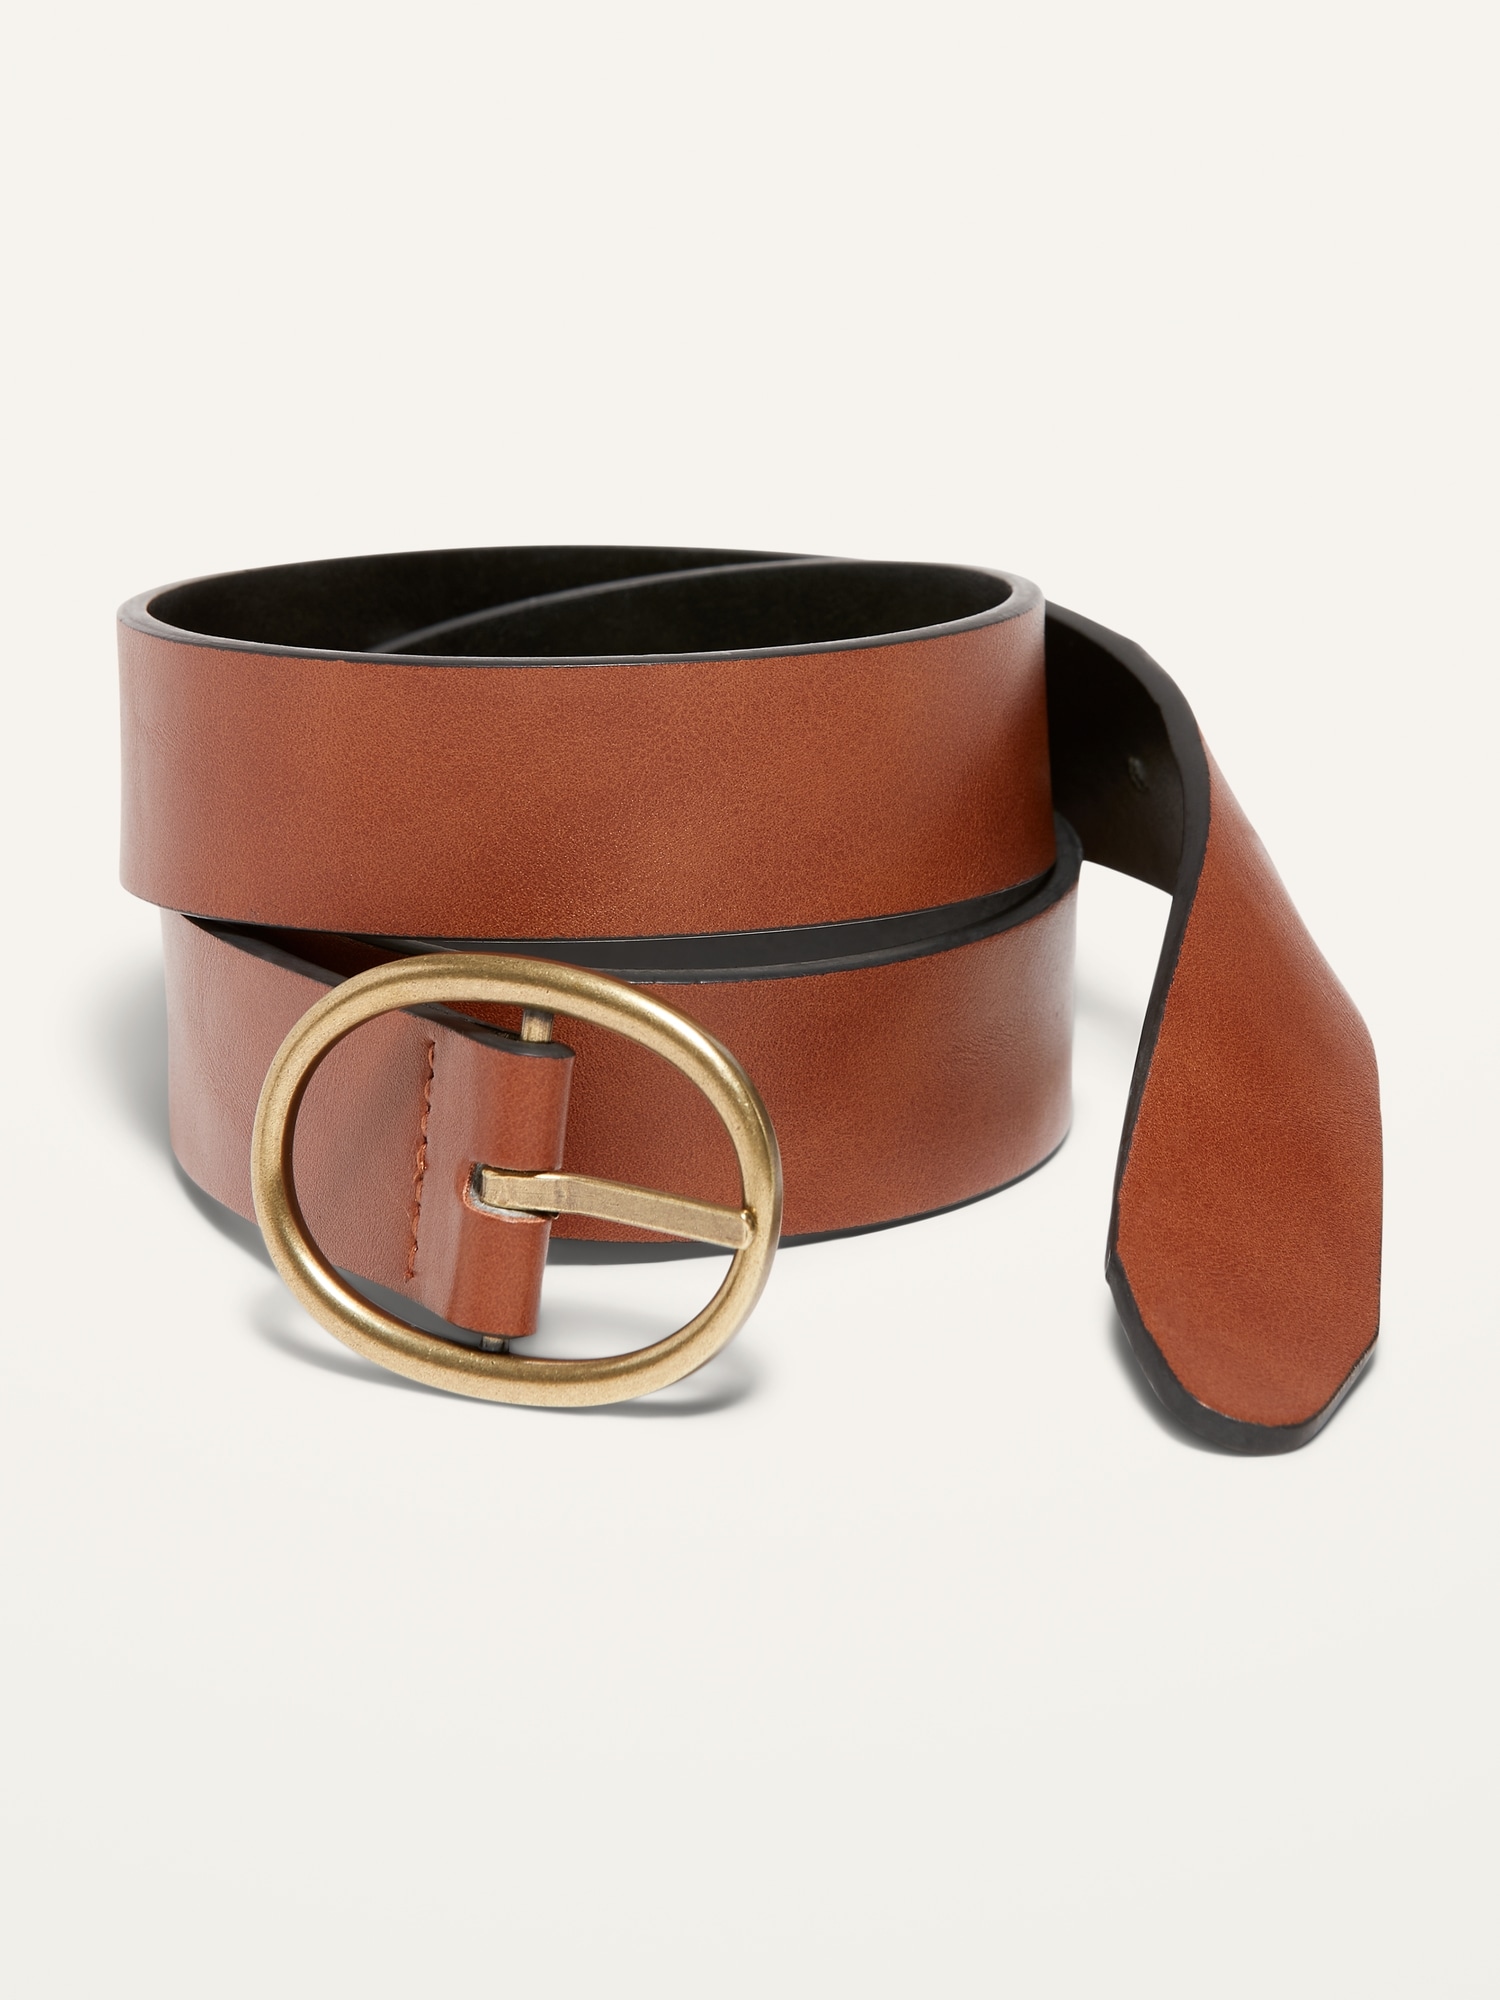 Old Navy Women's Reversible Faux-Leather Belt (1.25-Inch) - - Size 2X/3X